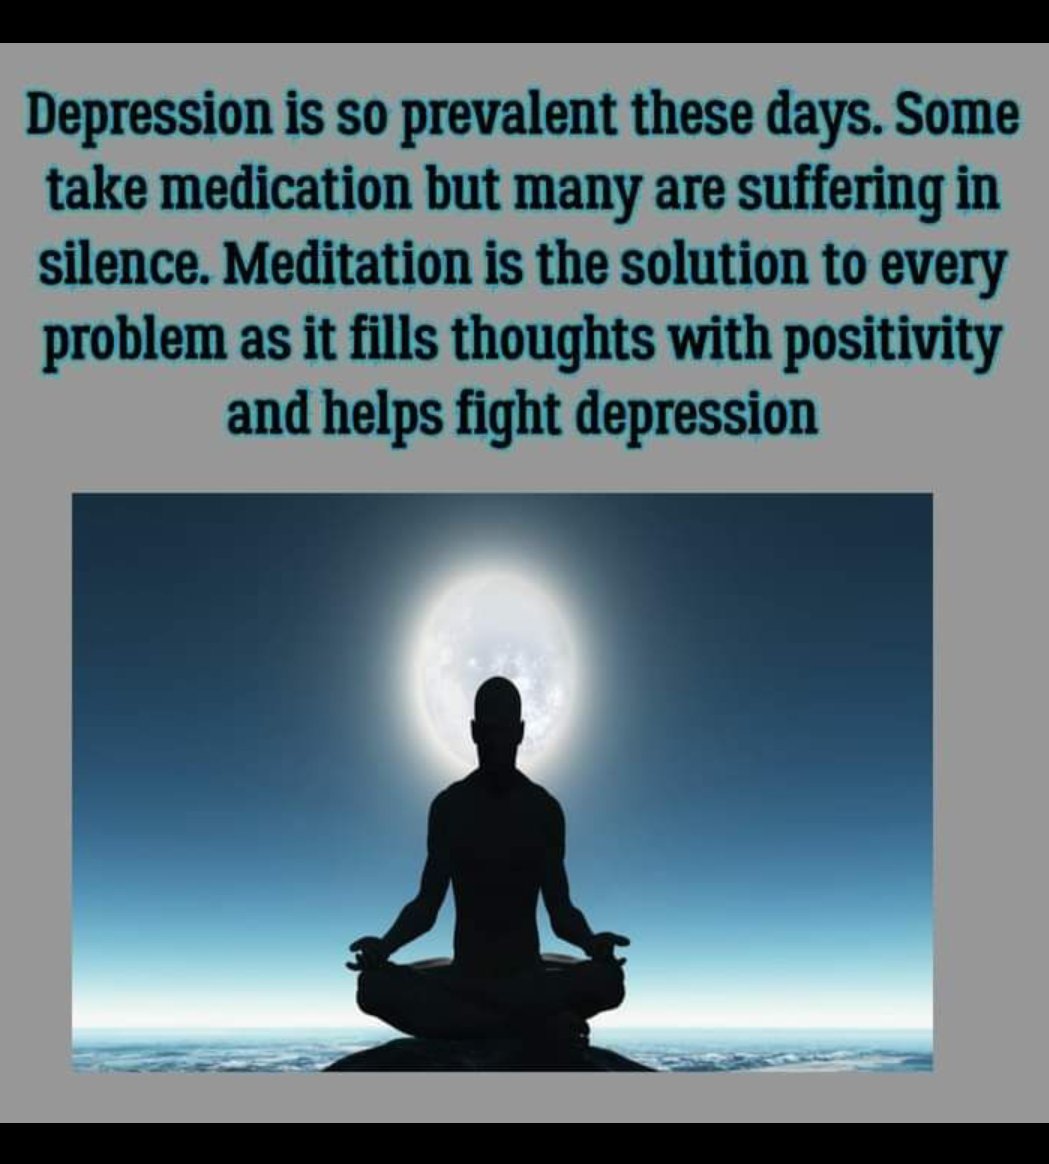 Don't let stress and anger overpower you.beat them with meditation.stress, anger and anxiety weaken our thinking capacity.Regular meditation and prayer with devotion boost willpower enhance brainfunction and giving solution to problem inspiring by saint dr msg 
#BeatDepression